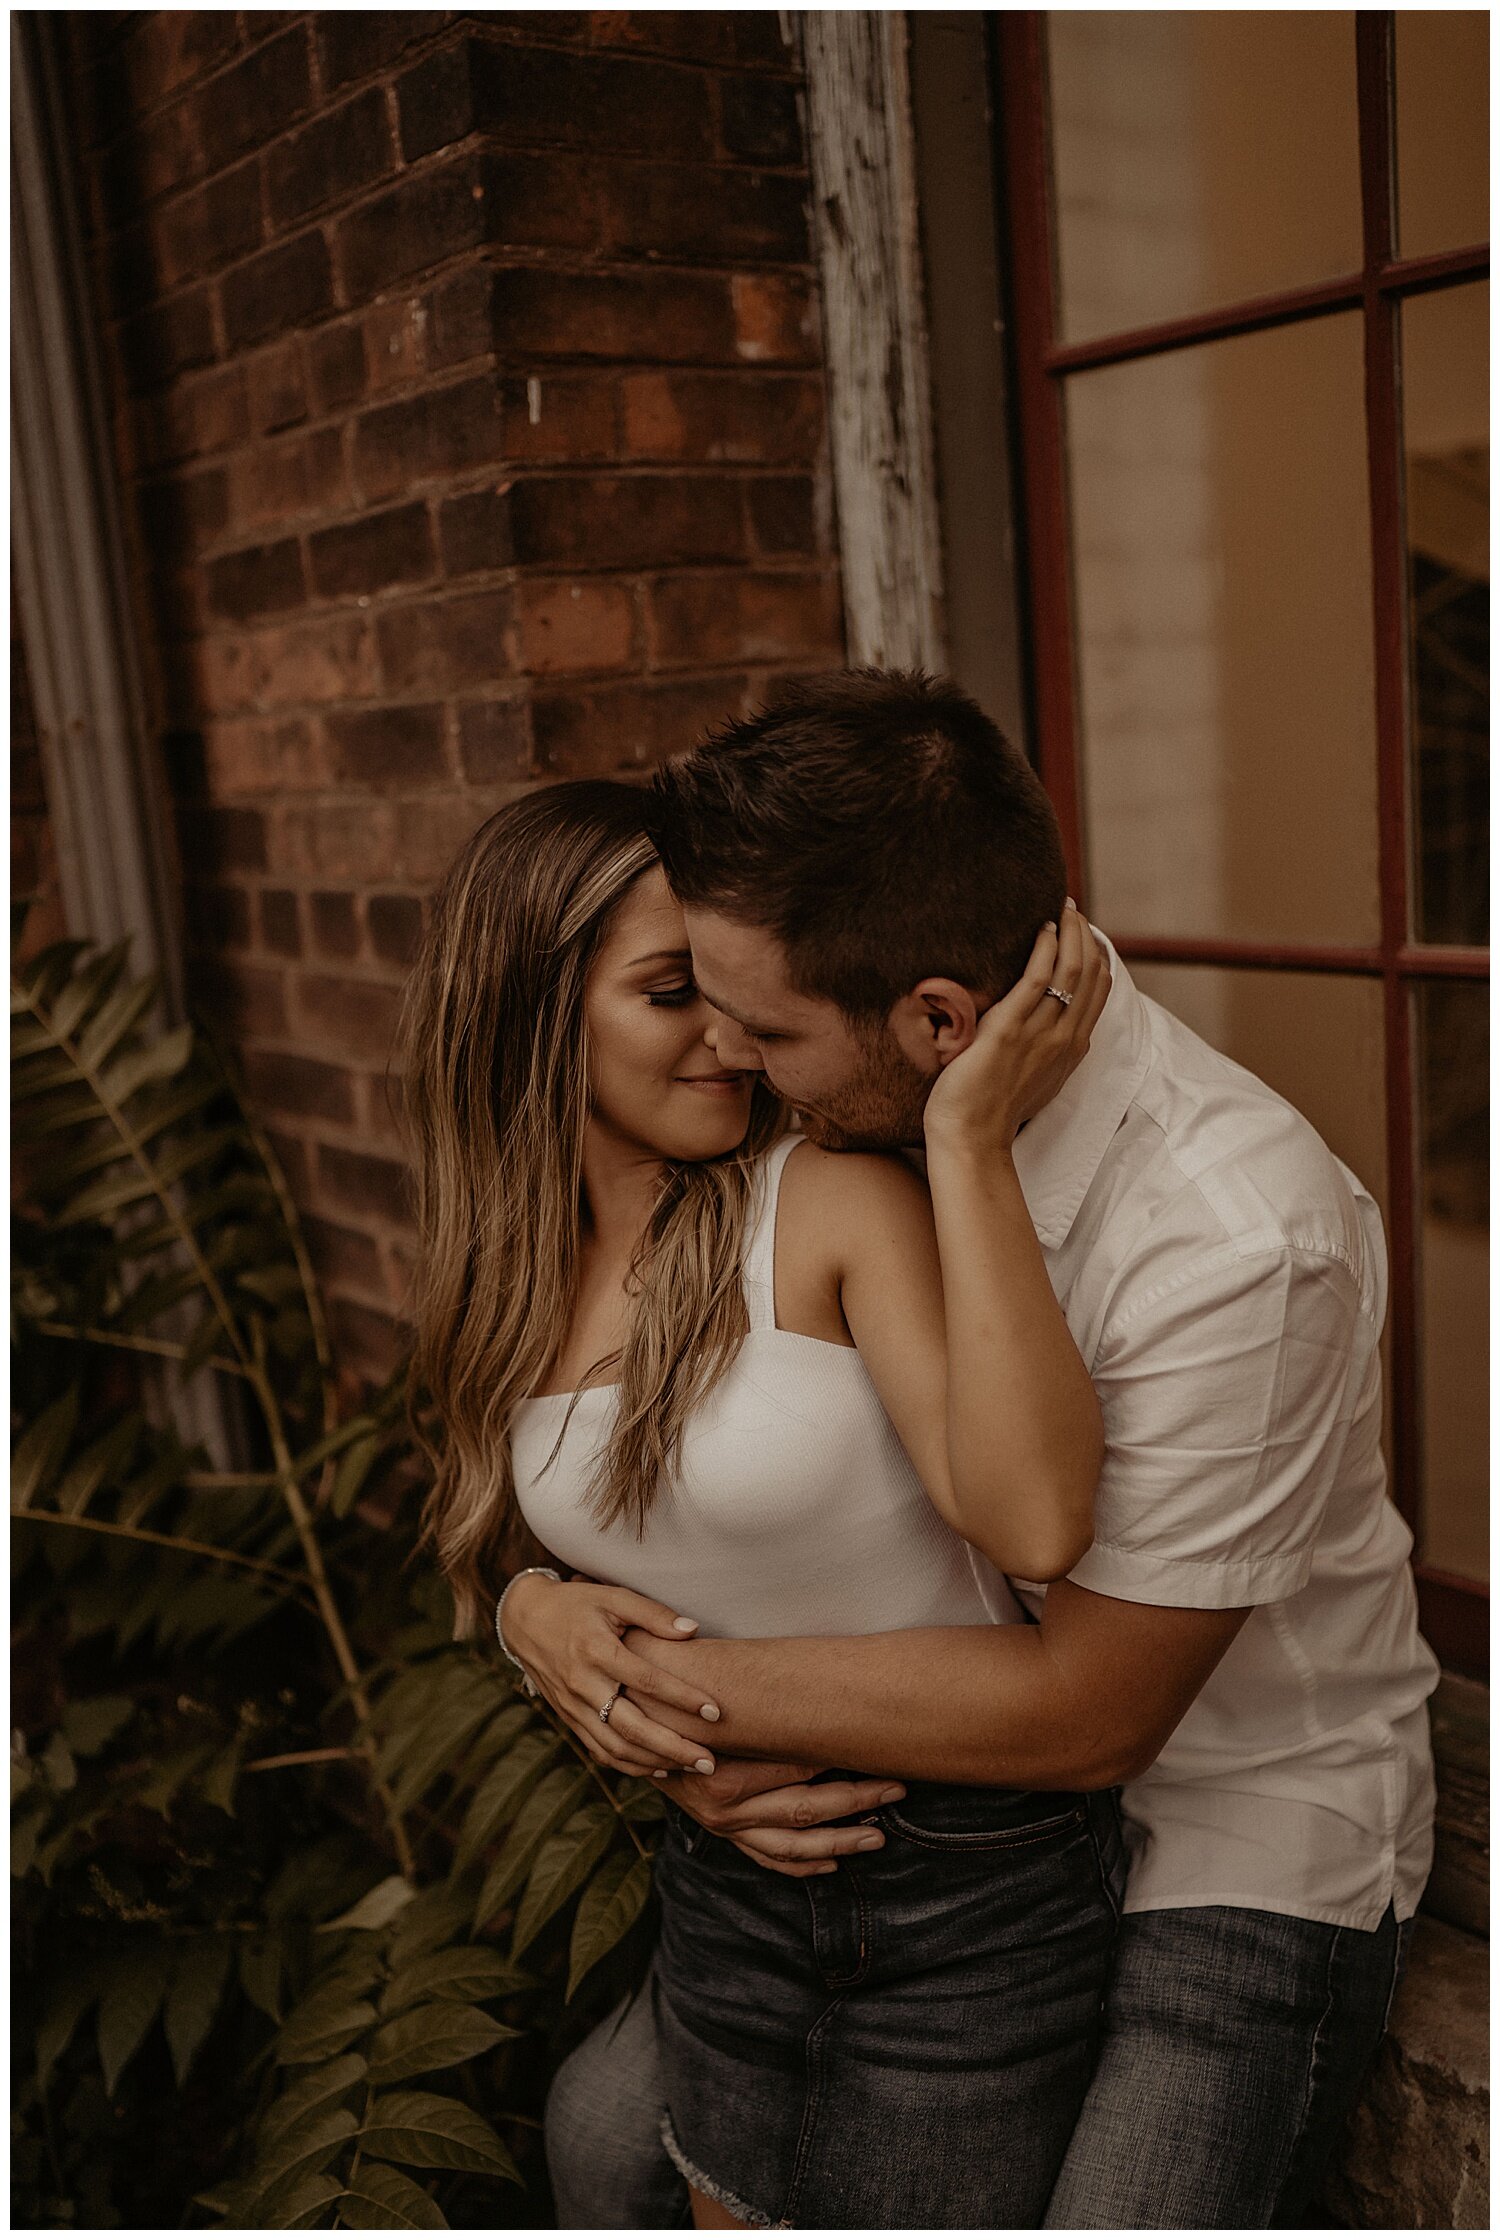 Cotton_Factory_And_Waterfall_Engagement_Session_Hamilton_Ontario_Wedding_Photographer_0057.jpg